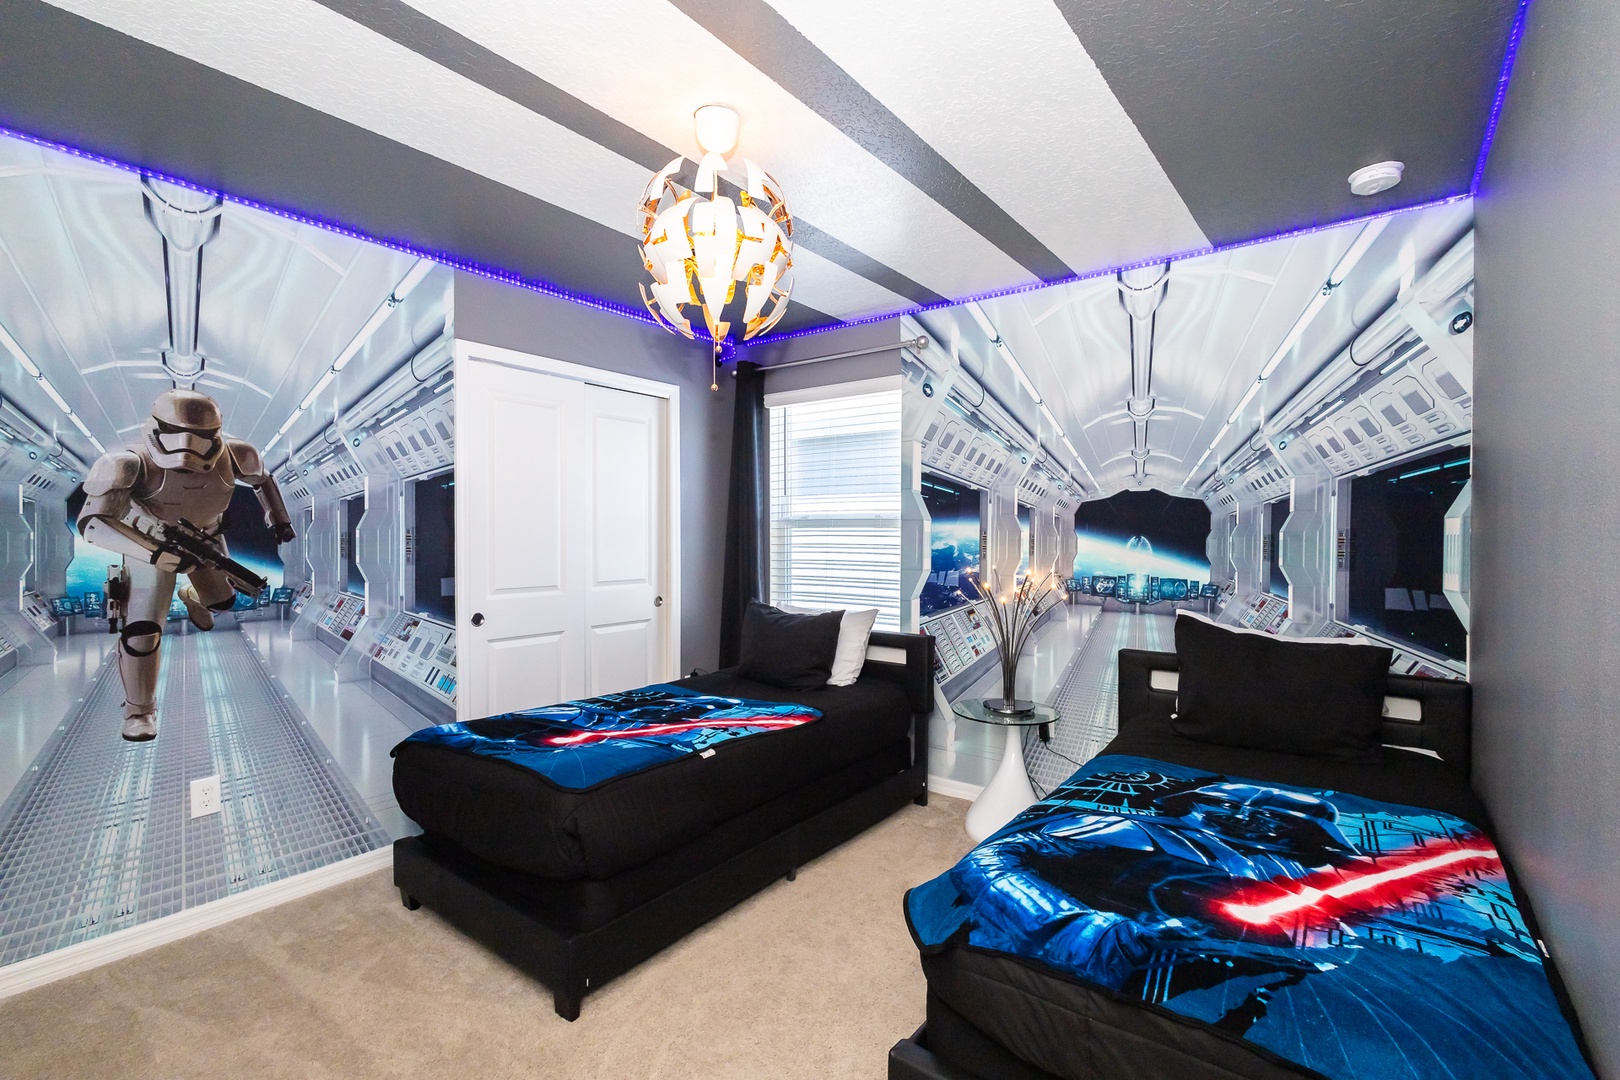 This 2nd floor bedroom with two twin beds & a Smart TV is out of this world!